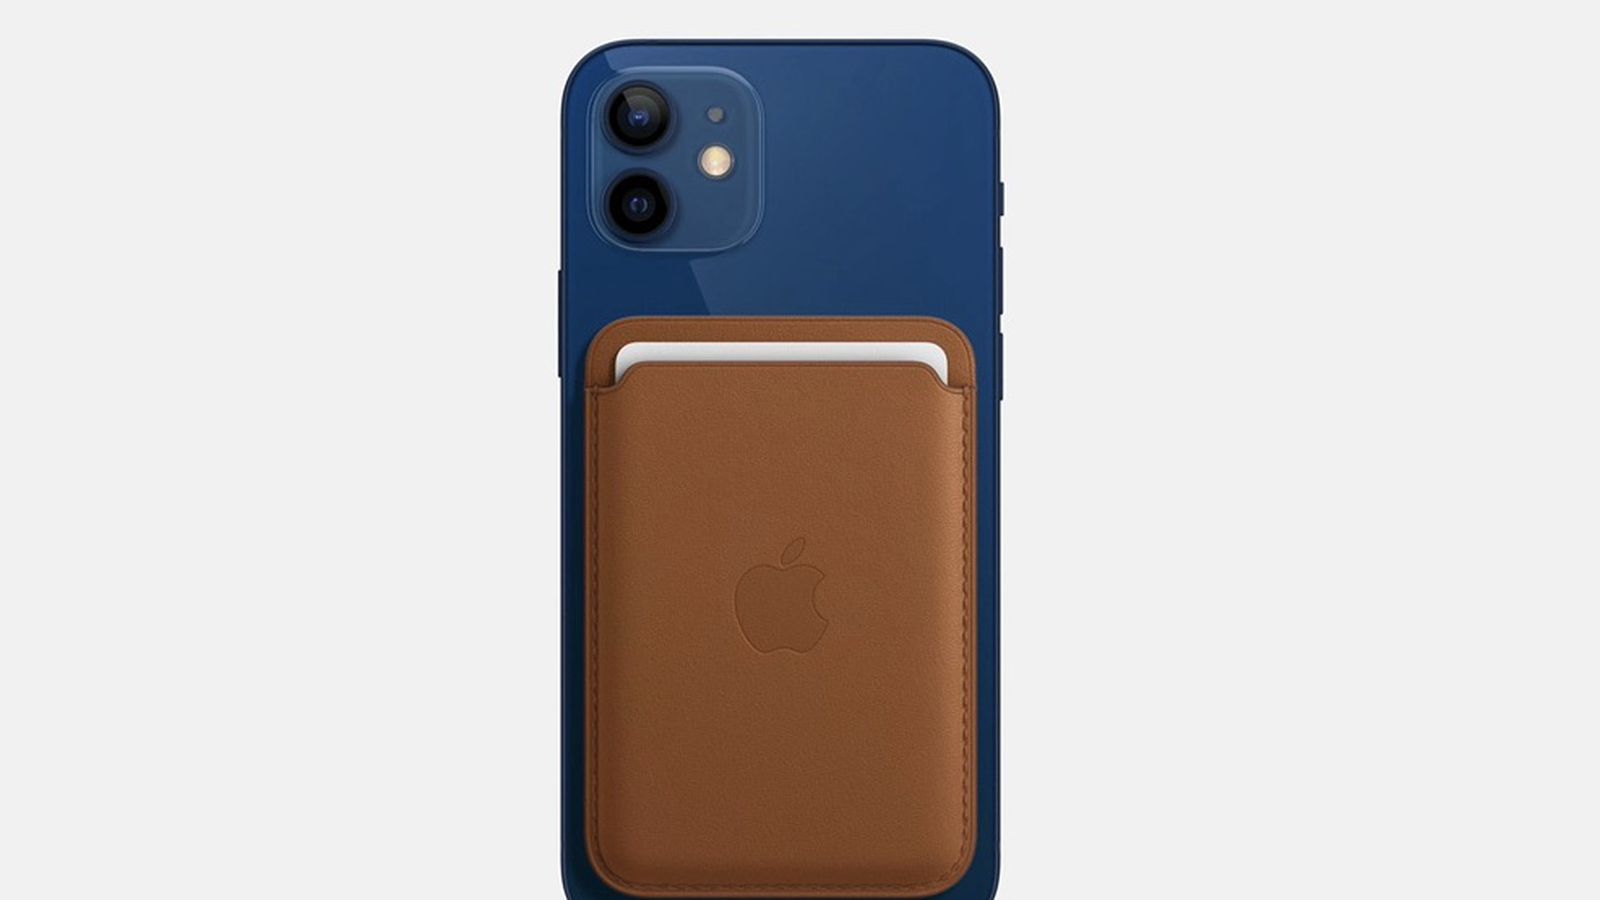 Apple Resurfaces 'MagSafe' Brand for New iPhone 12 Accessories